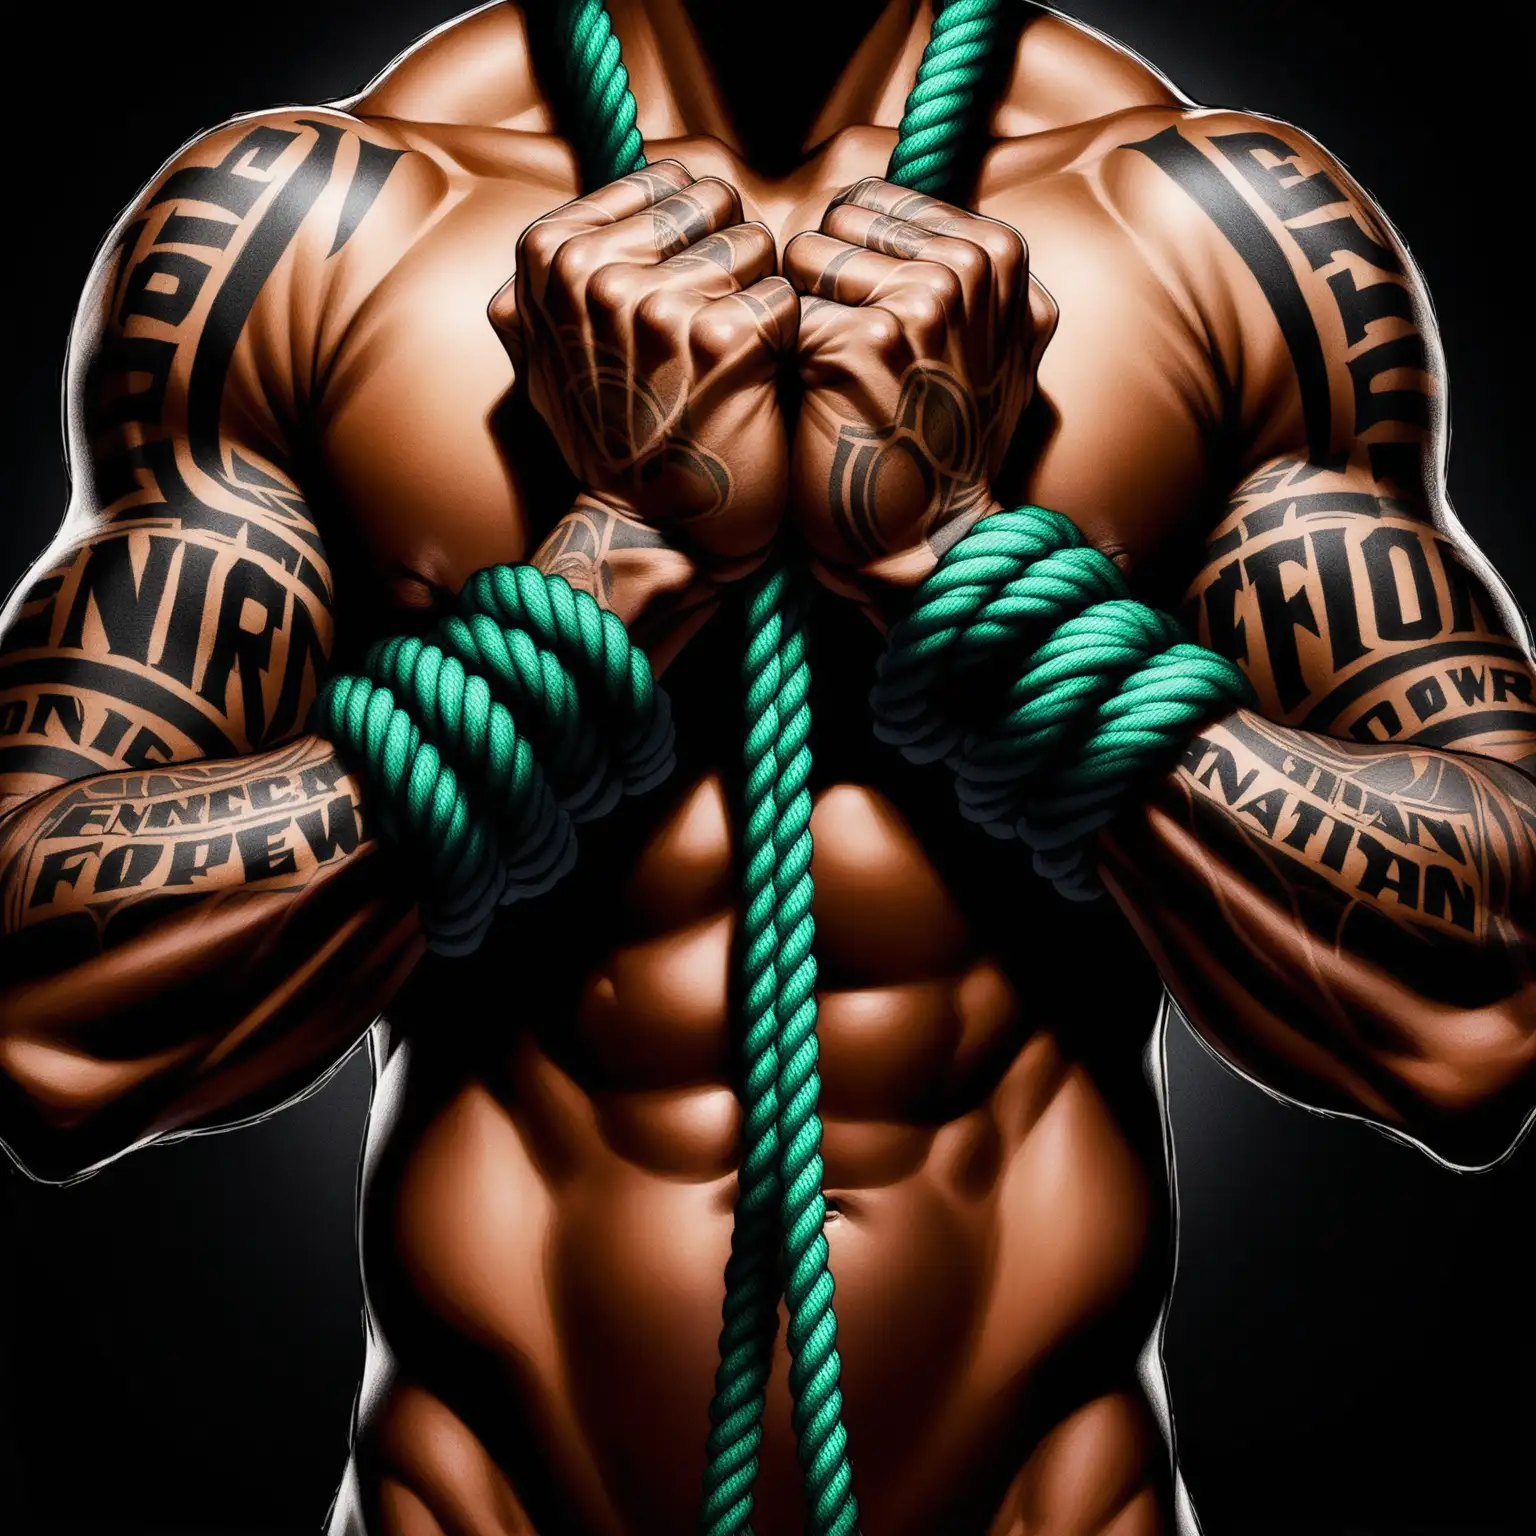 create an close up image one African American male slave hands and forearms tied together with a rope  with rope around wrist and forearms facing outward with tattoos on each for forearms that showing veins from hard work, with the word emancipation one forearm and black power fist with in dark background  image should just show hands and forearms